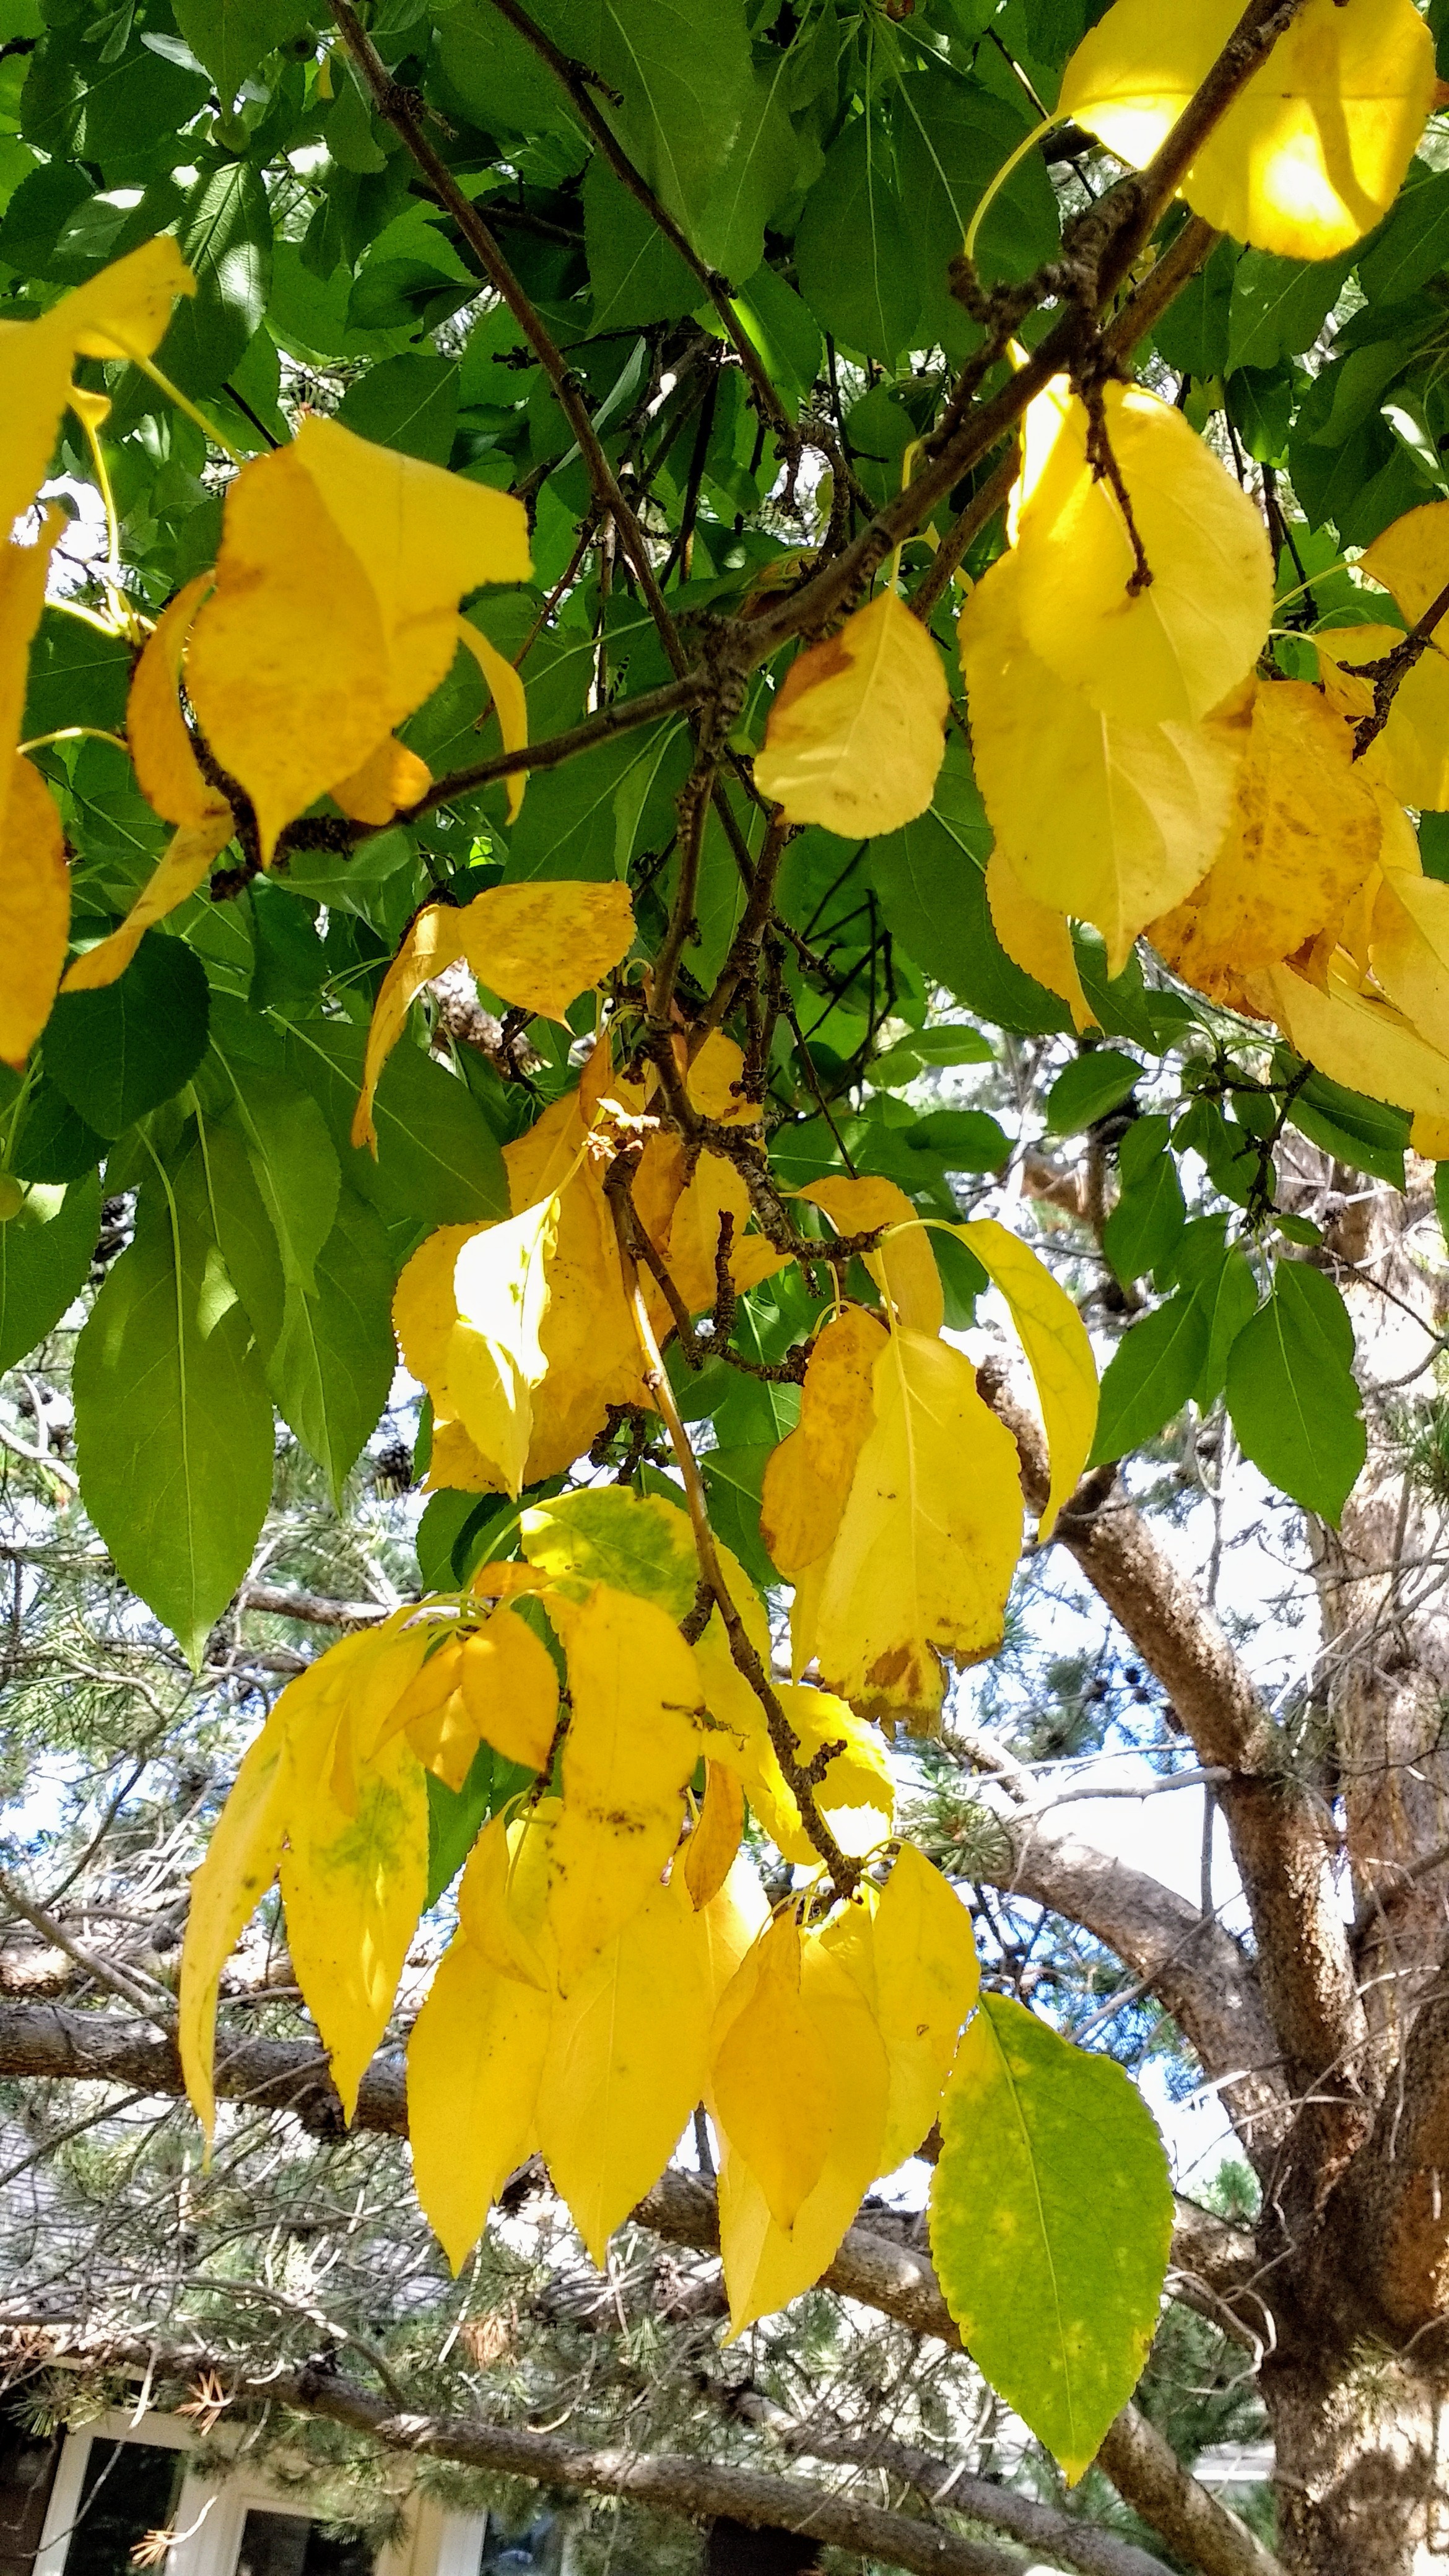 Tree leaves turning yellow - Ask an Expert